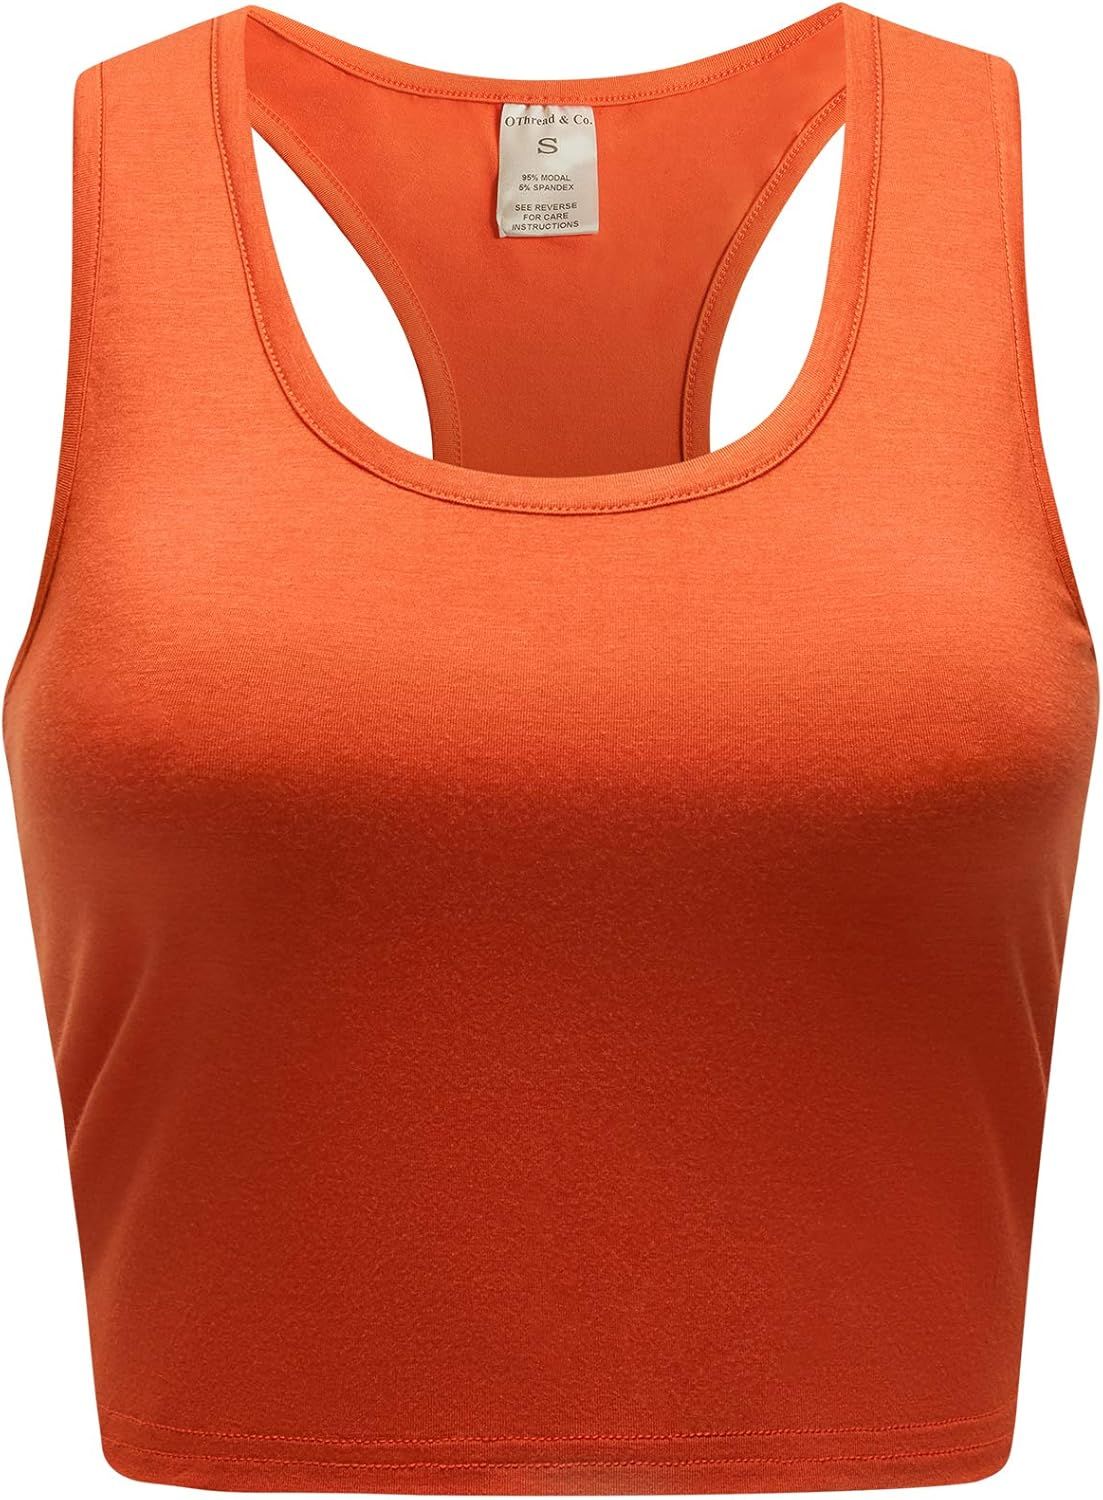 OThread & Co. Women's Basic Crop Tops Stretchy Casual Scoop Neck Racerback Sports Crop Tank Top | Amazon (US)